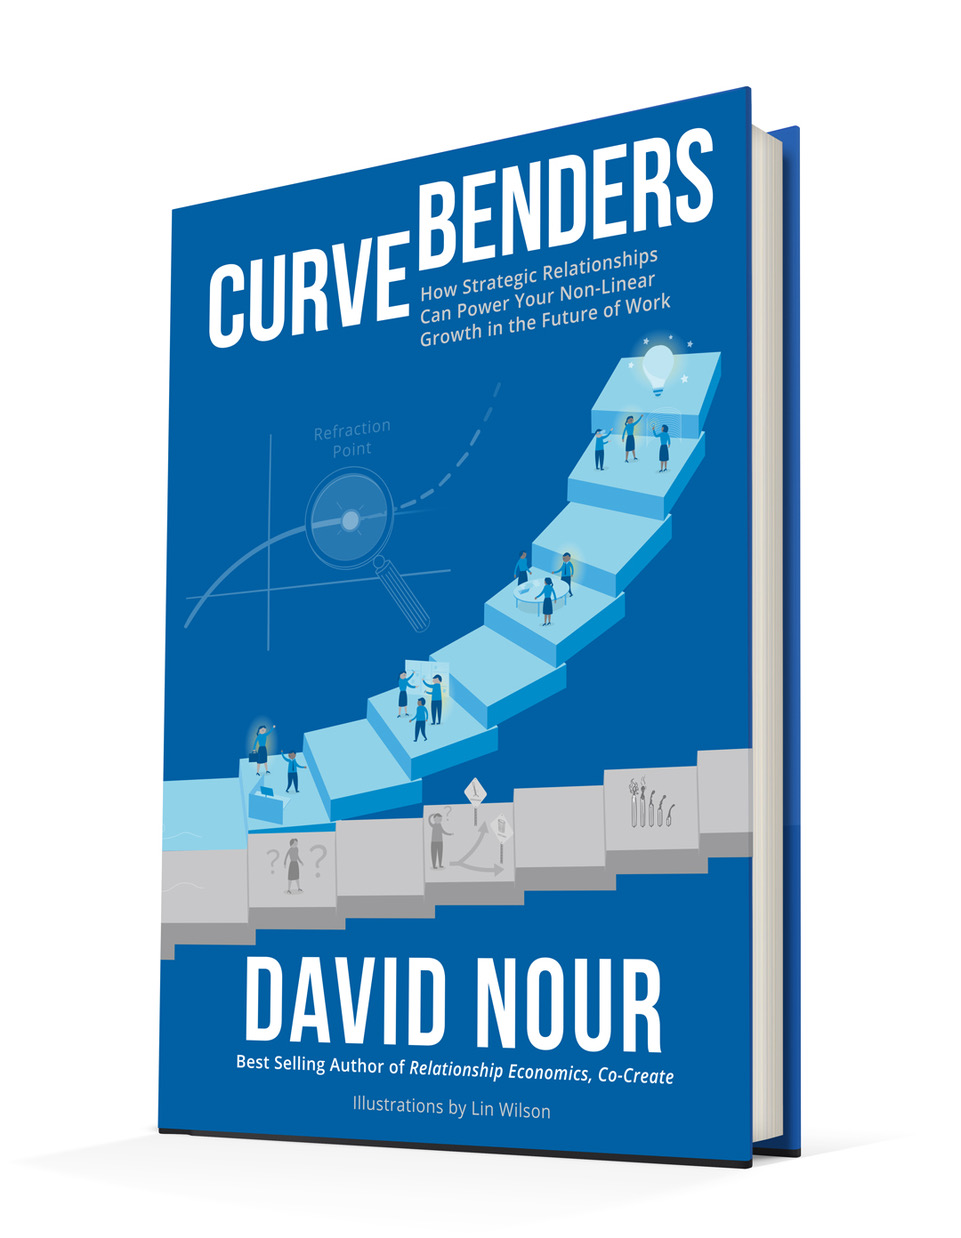 Book cover - Curve Benders by David Nour